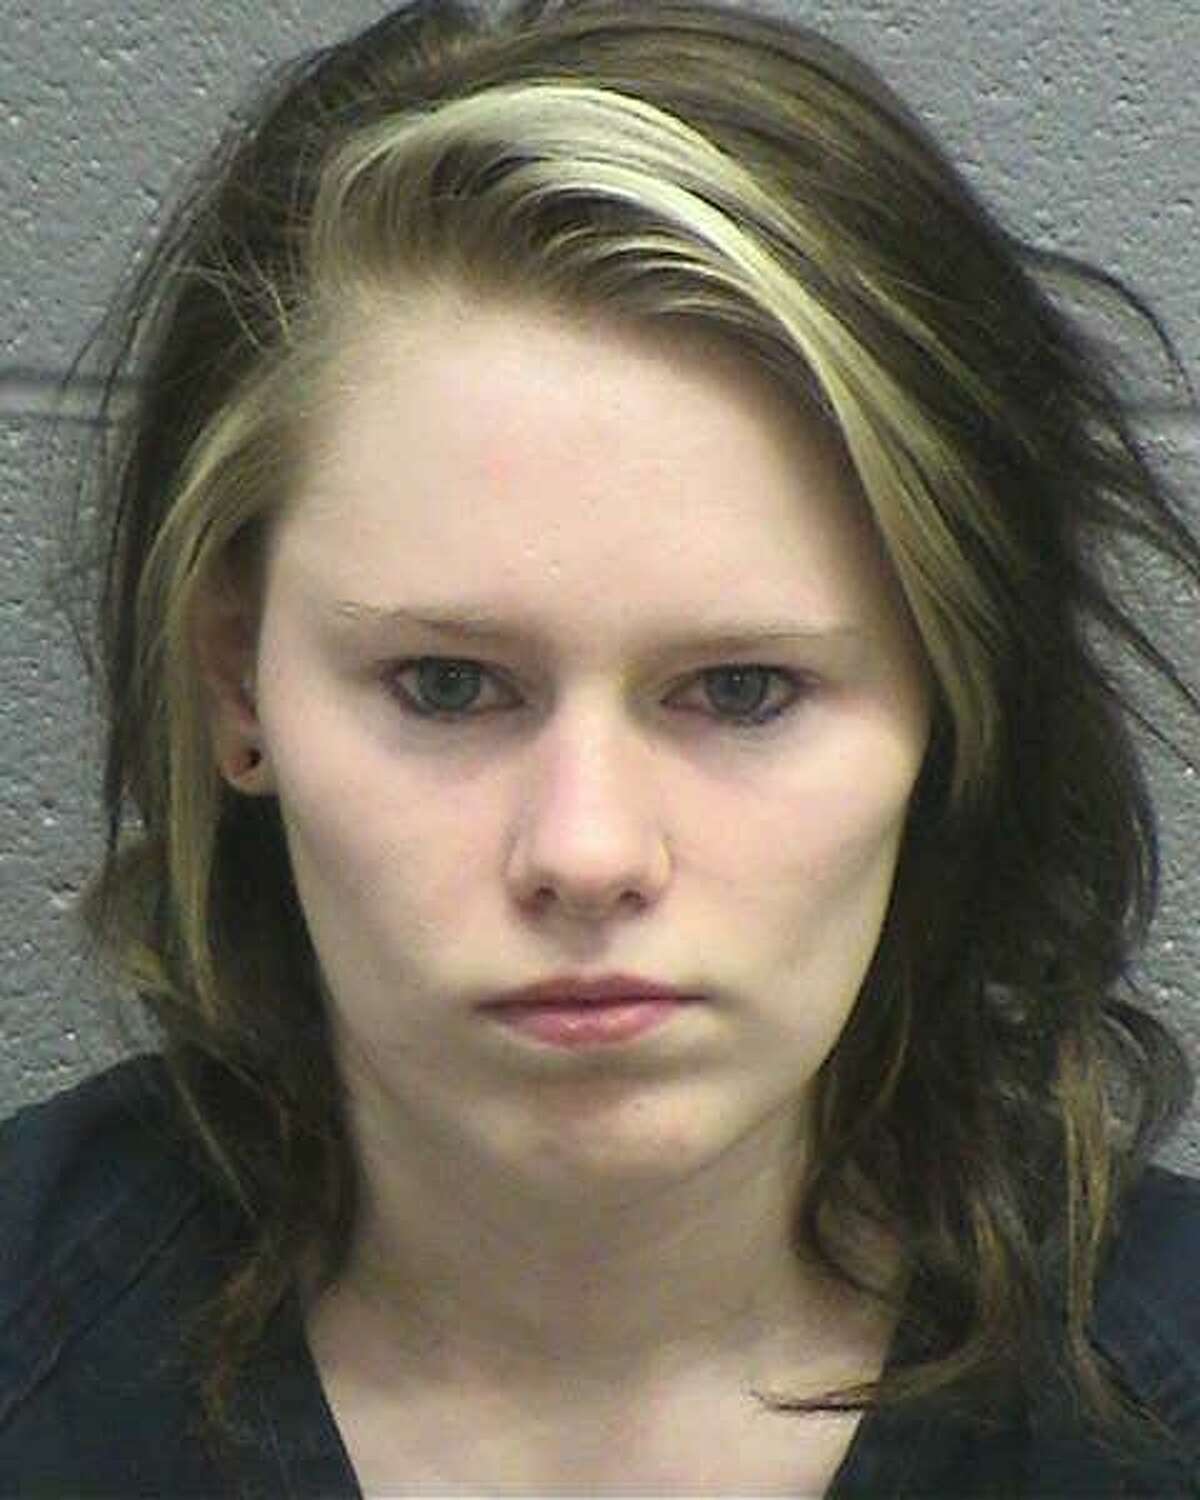 19-year-old female arrested for sexual acts with a minor photo